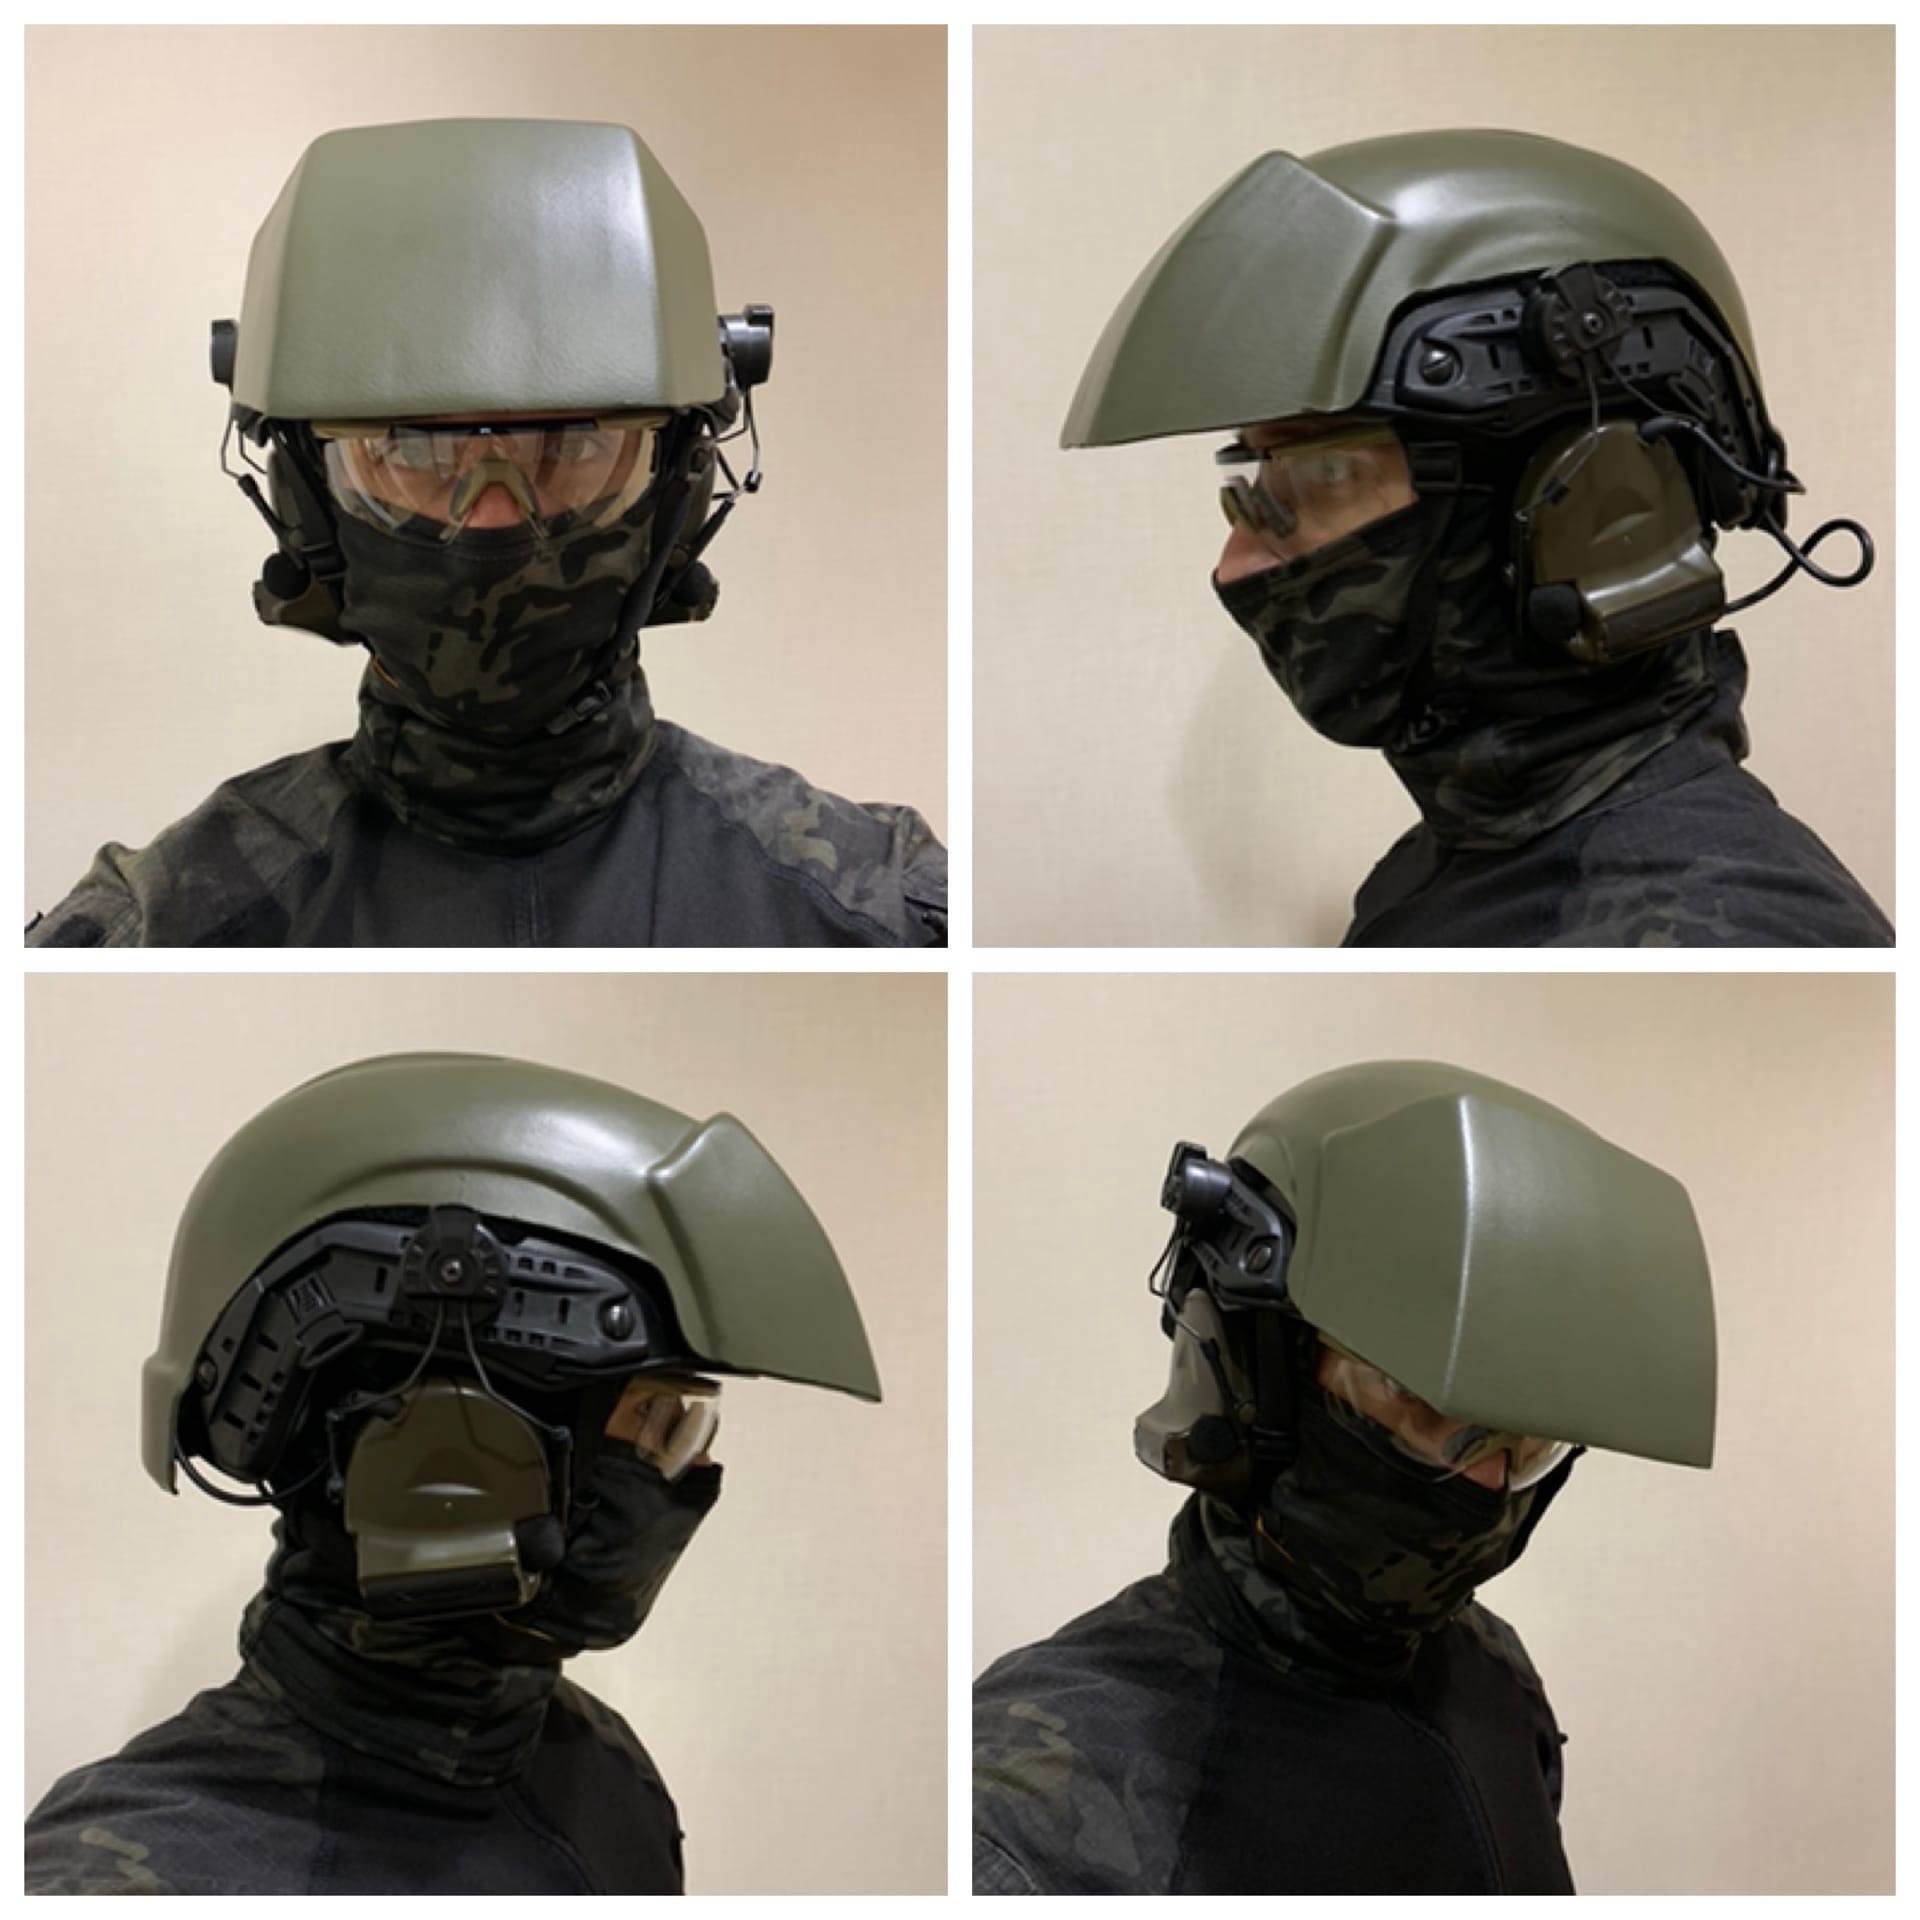 HALO UNSC marine helmet for airsoft and cosplay - Crealandia